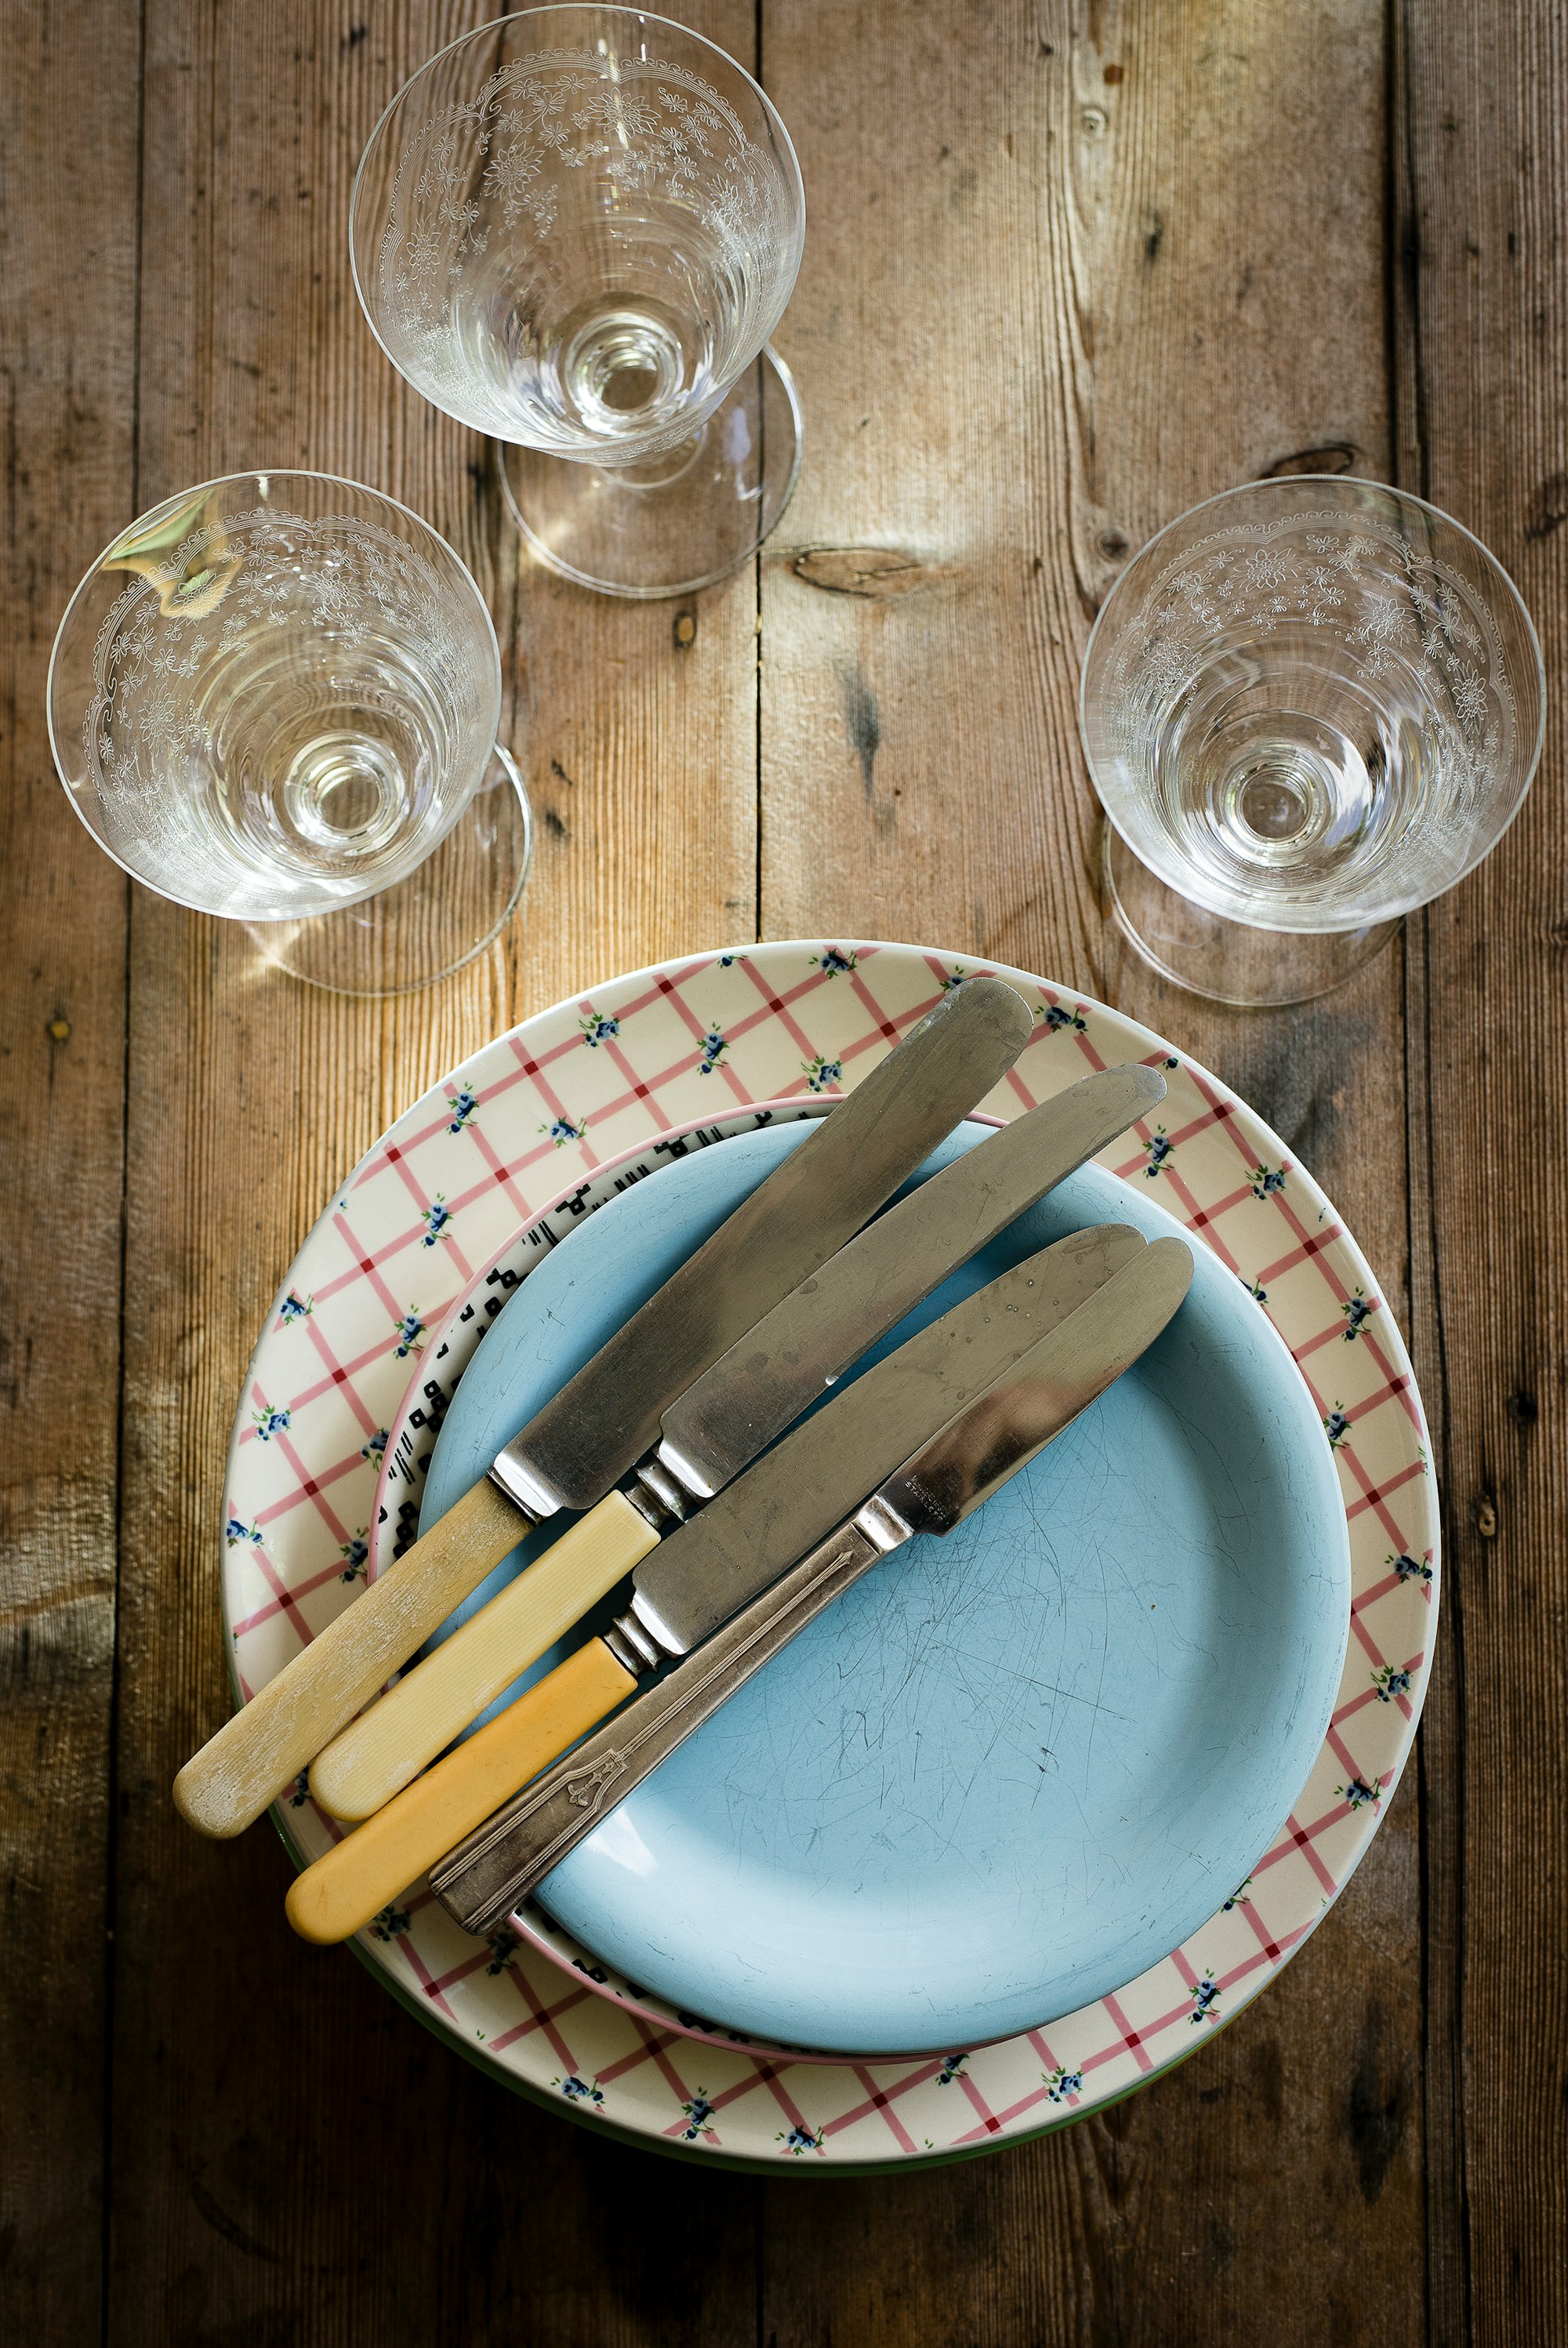 Shot by Stephen Hocking for our The Long Weekend catalogue earlier this year.  Featuring our own plates!